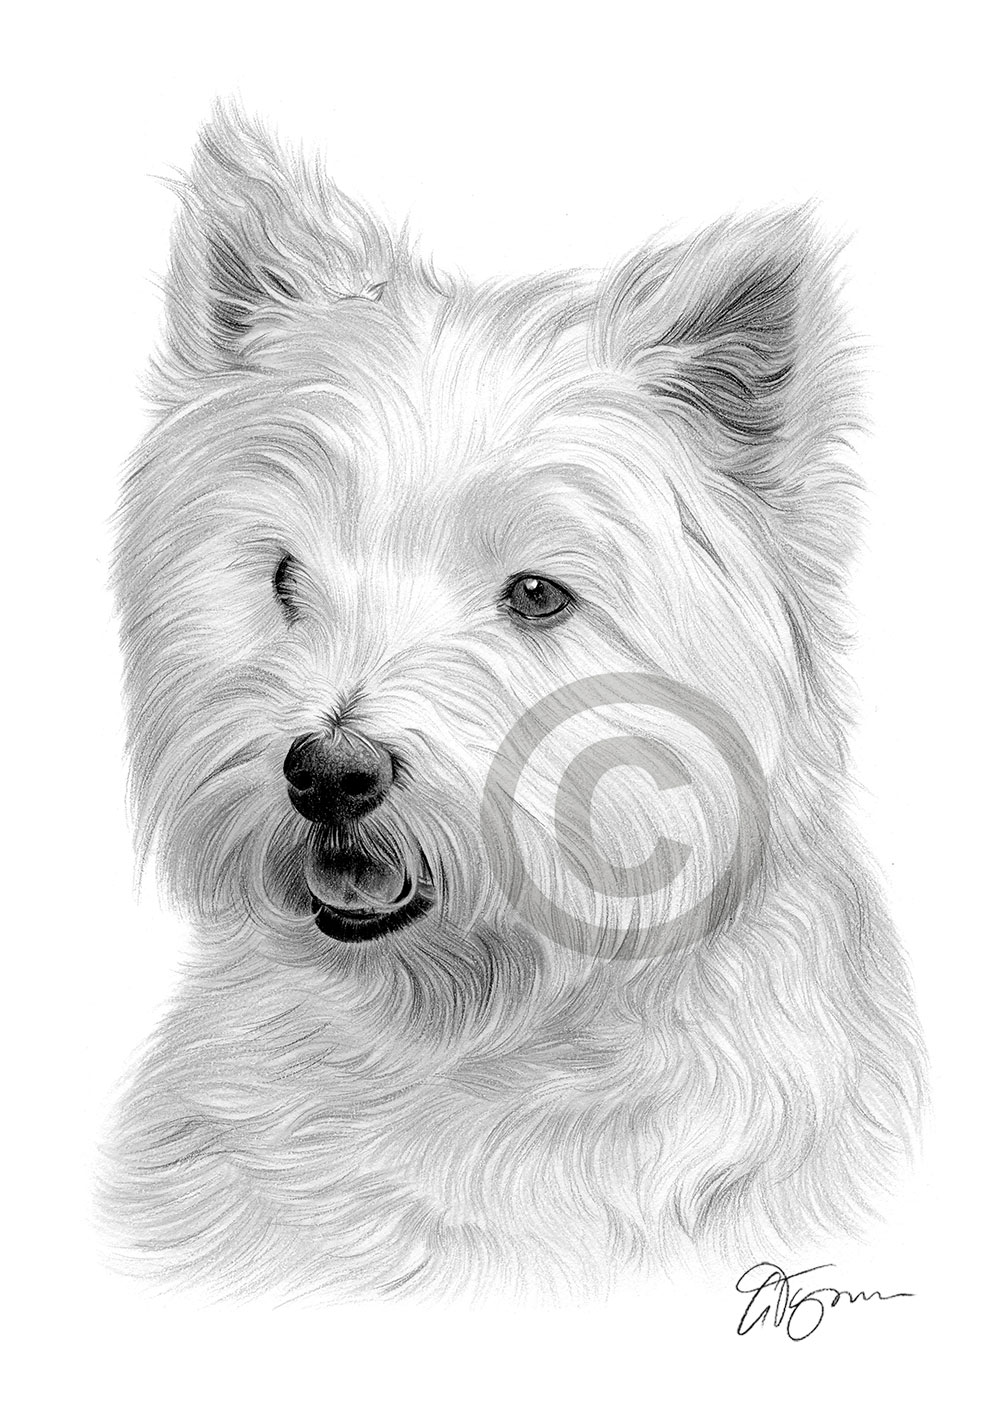 Pencil drawing of an adult west highland white terrier by artist Gary Tymon